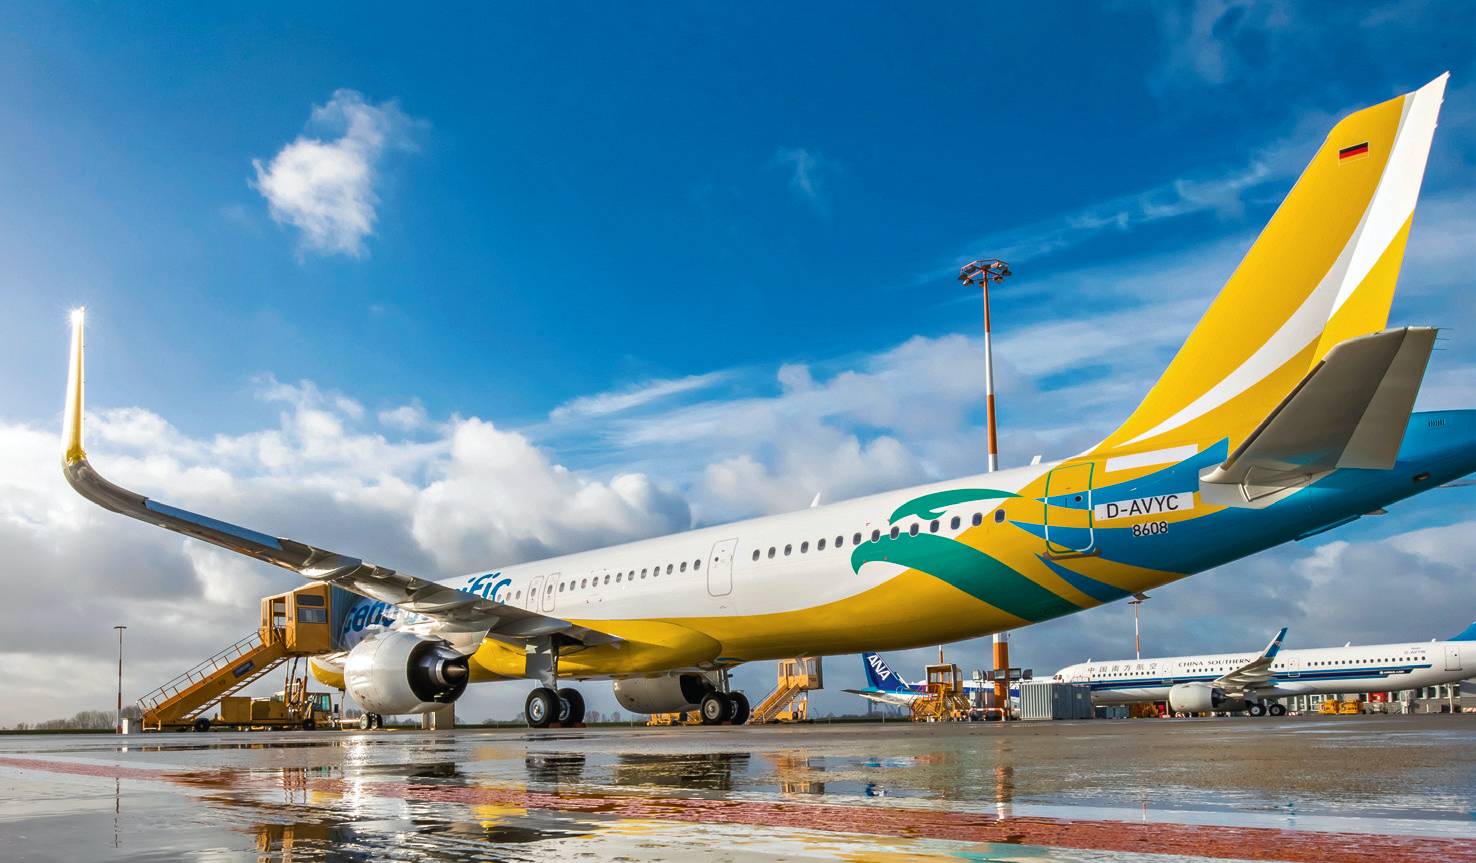 Cebu pacific | book our flights online & save | low-fares, offers & more